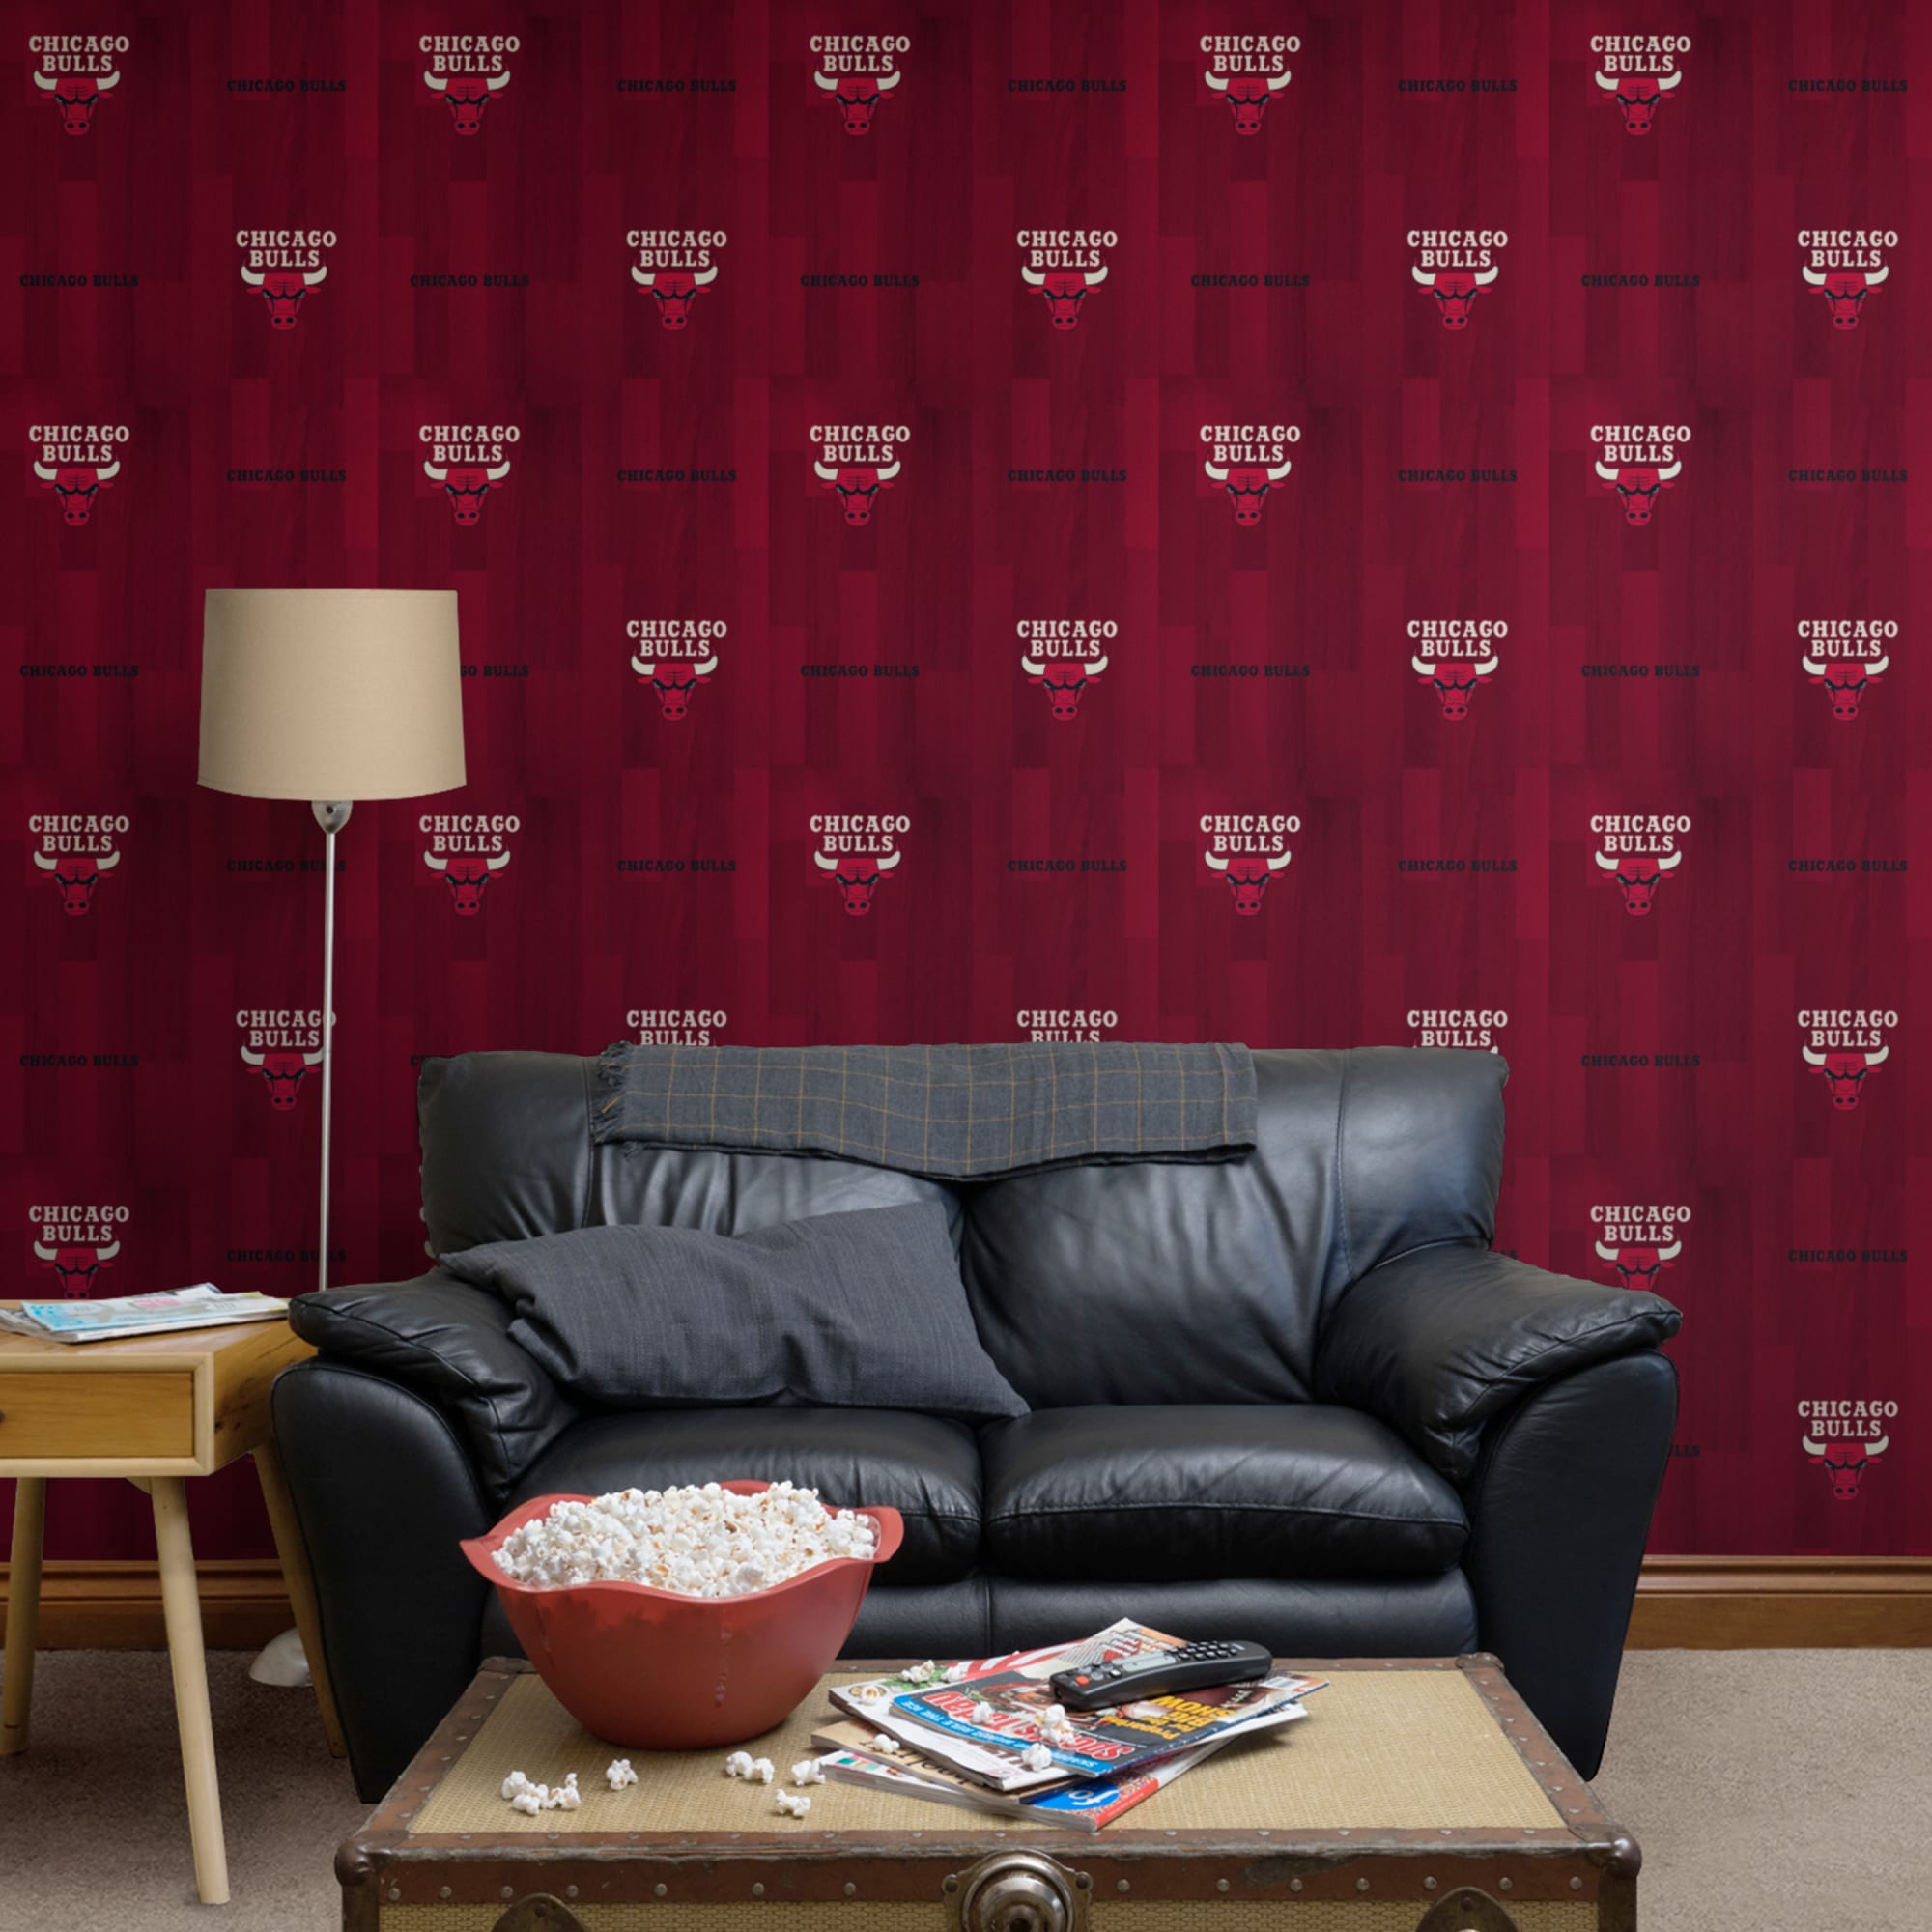 Chicago Bulls: Hardwood Pattern - Officially Licensed Removable Wallpaper 12" x 12" Sample by Fathead